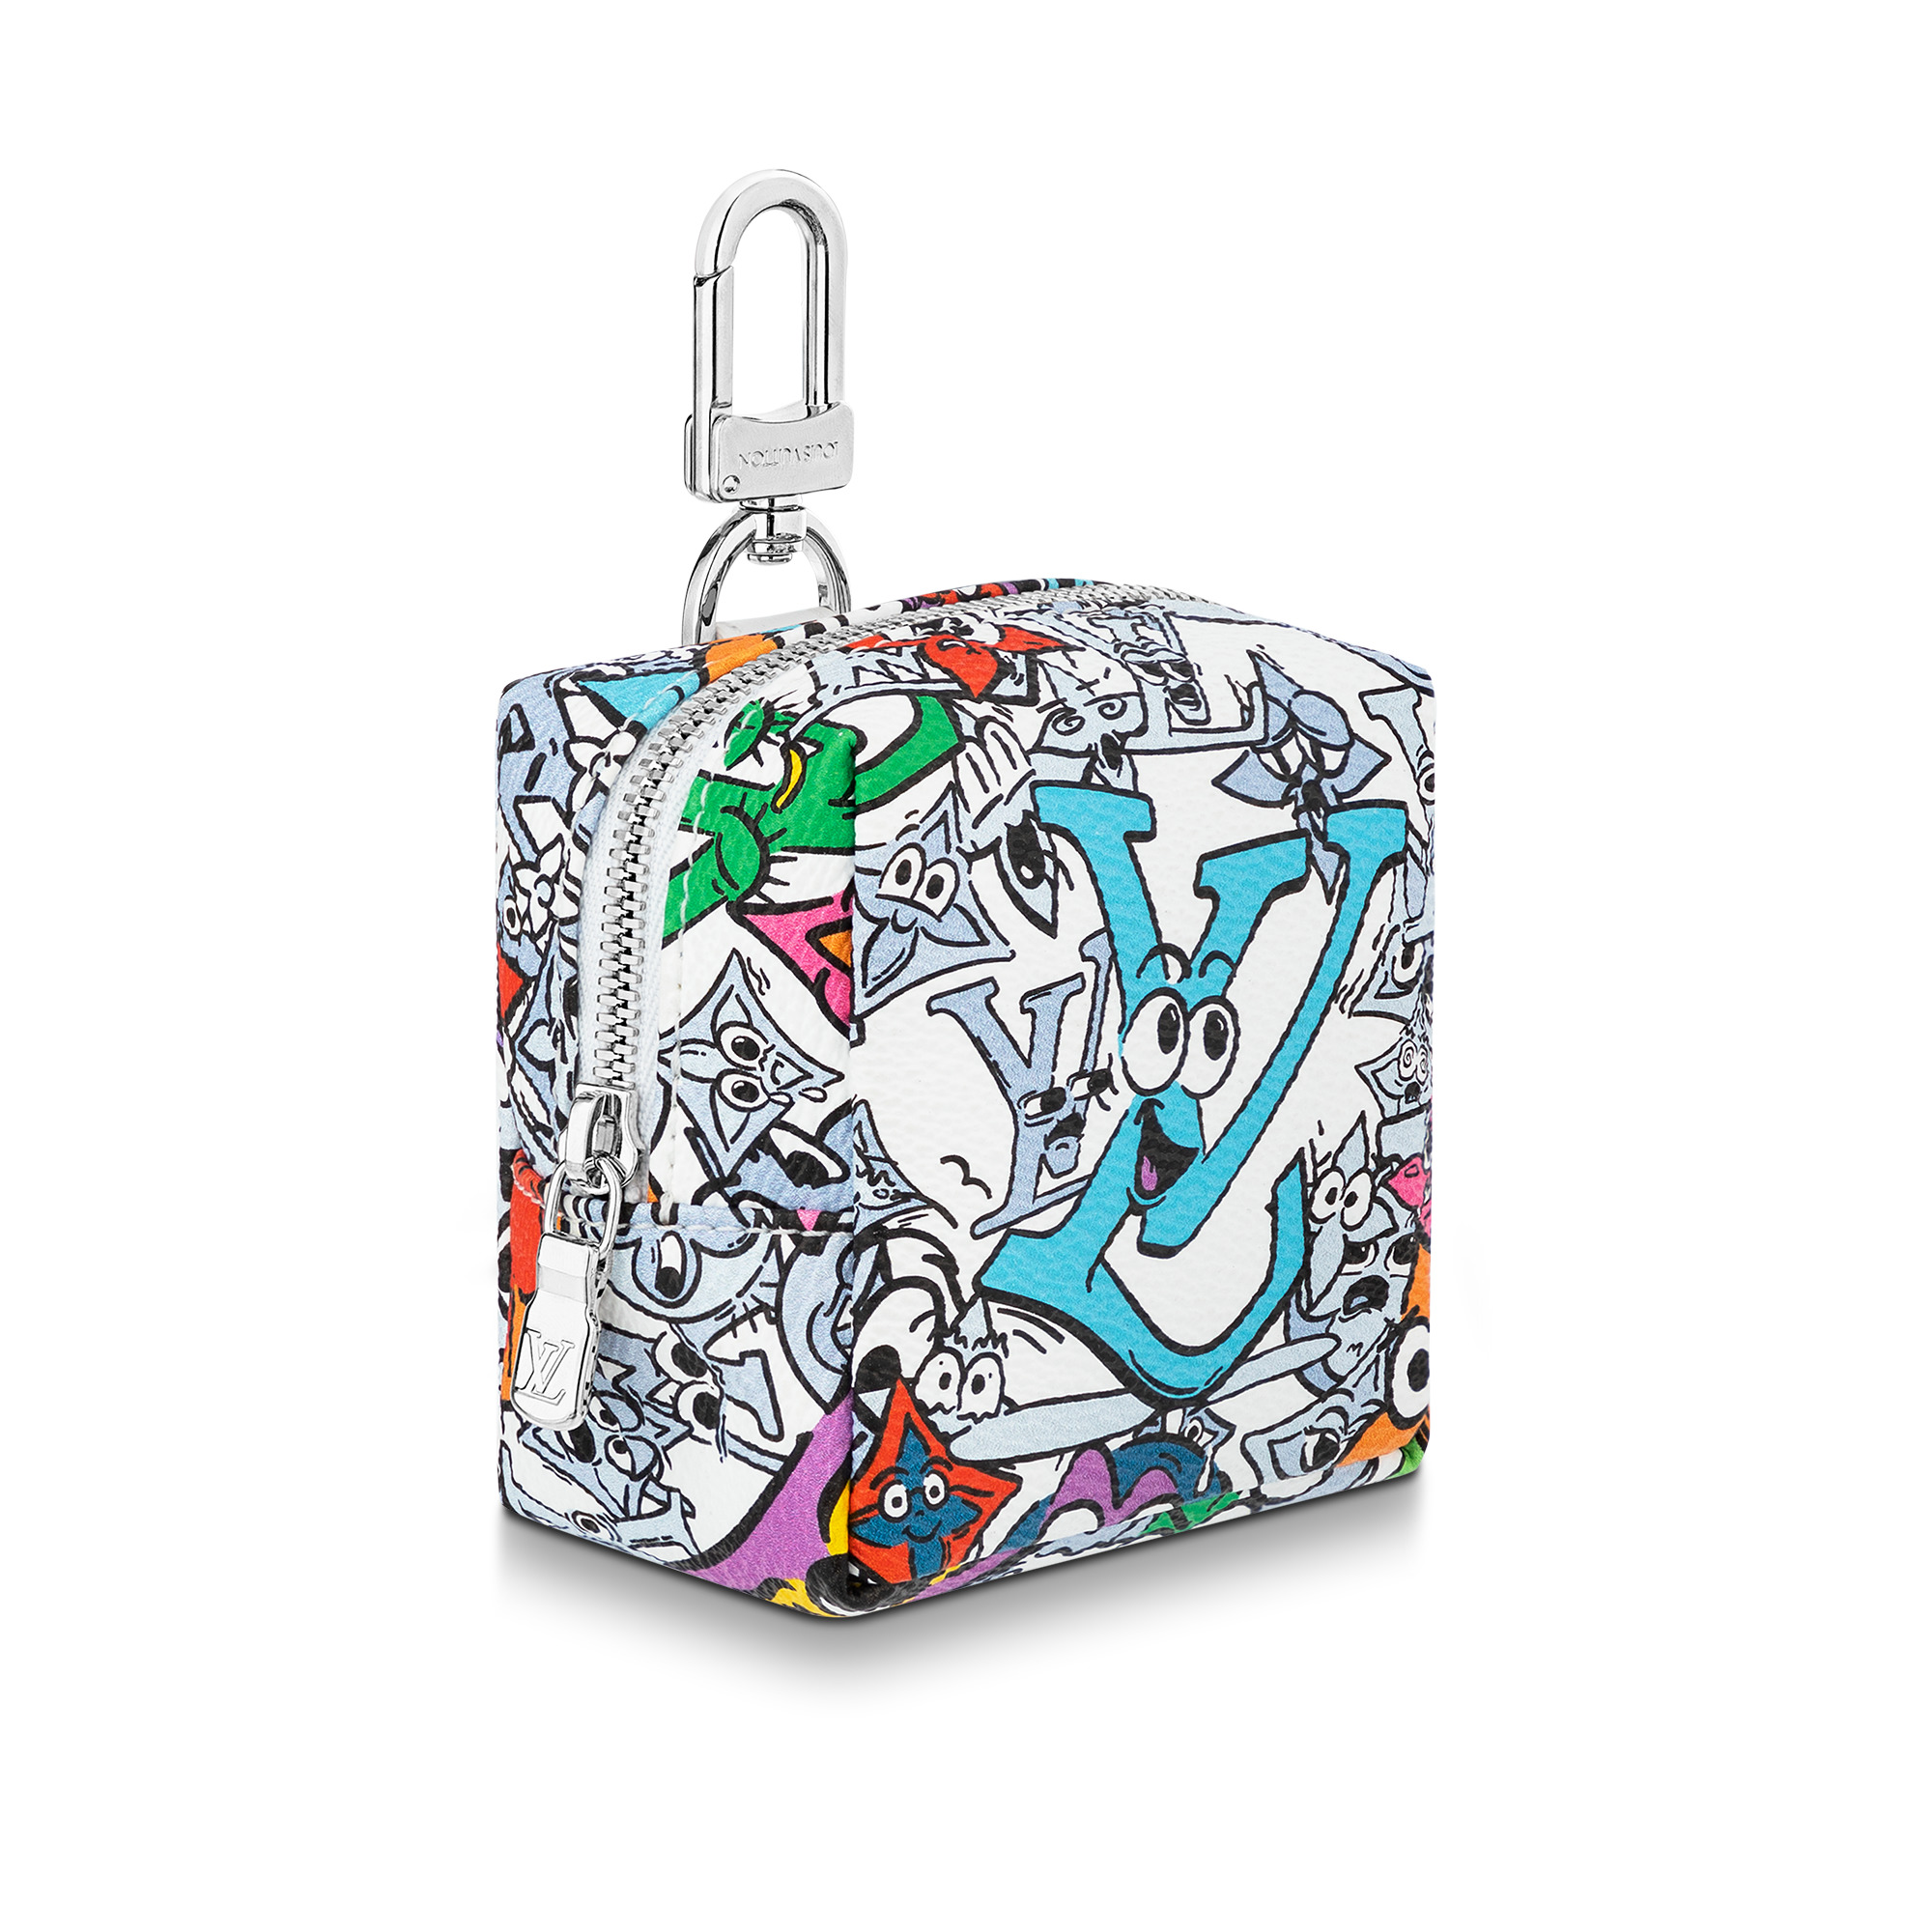 Squared Pouch Key Holder And Bag Charm - 5